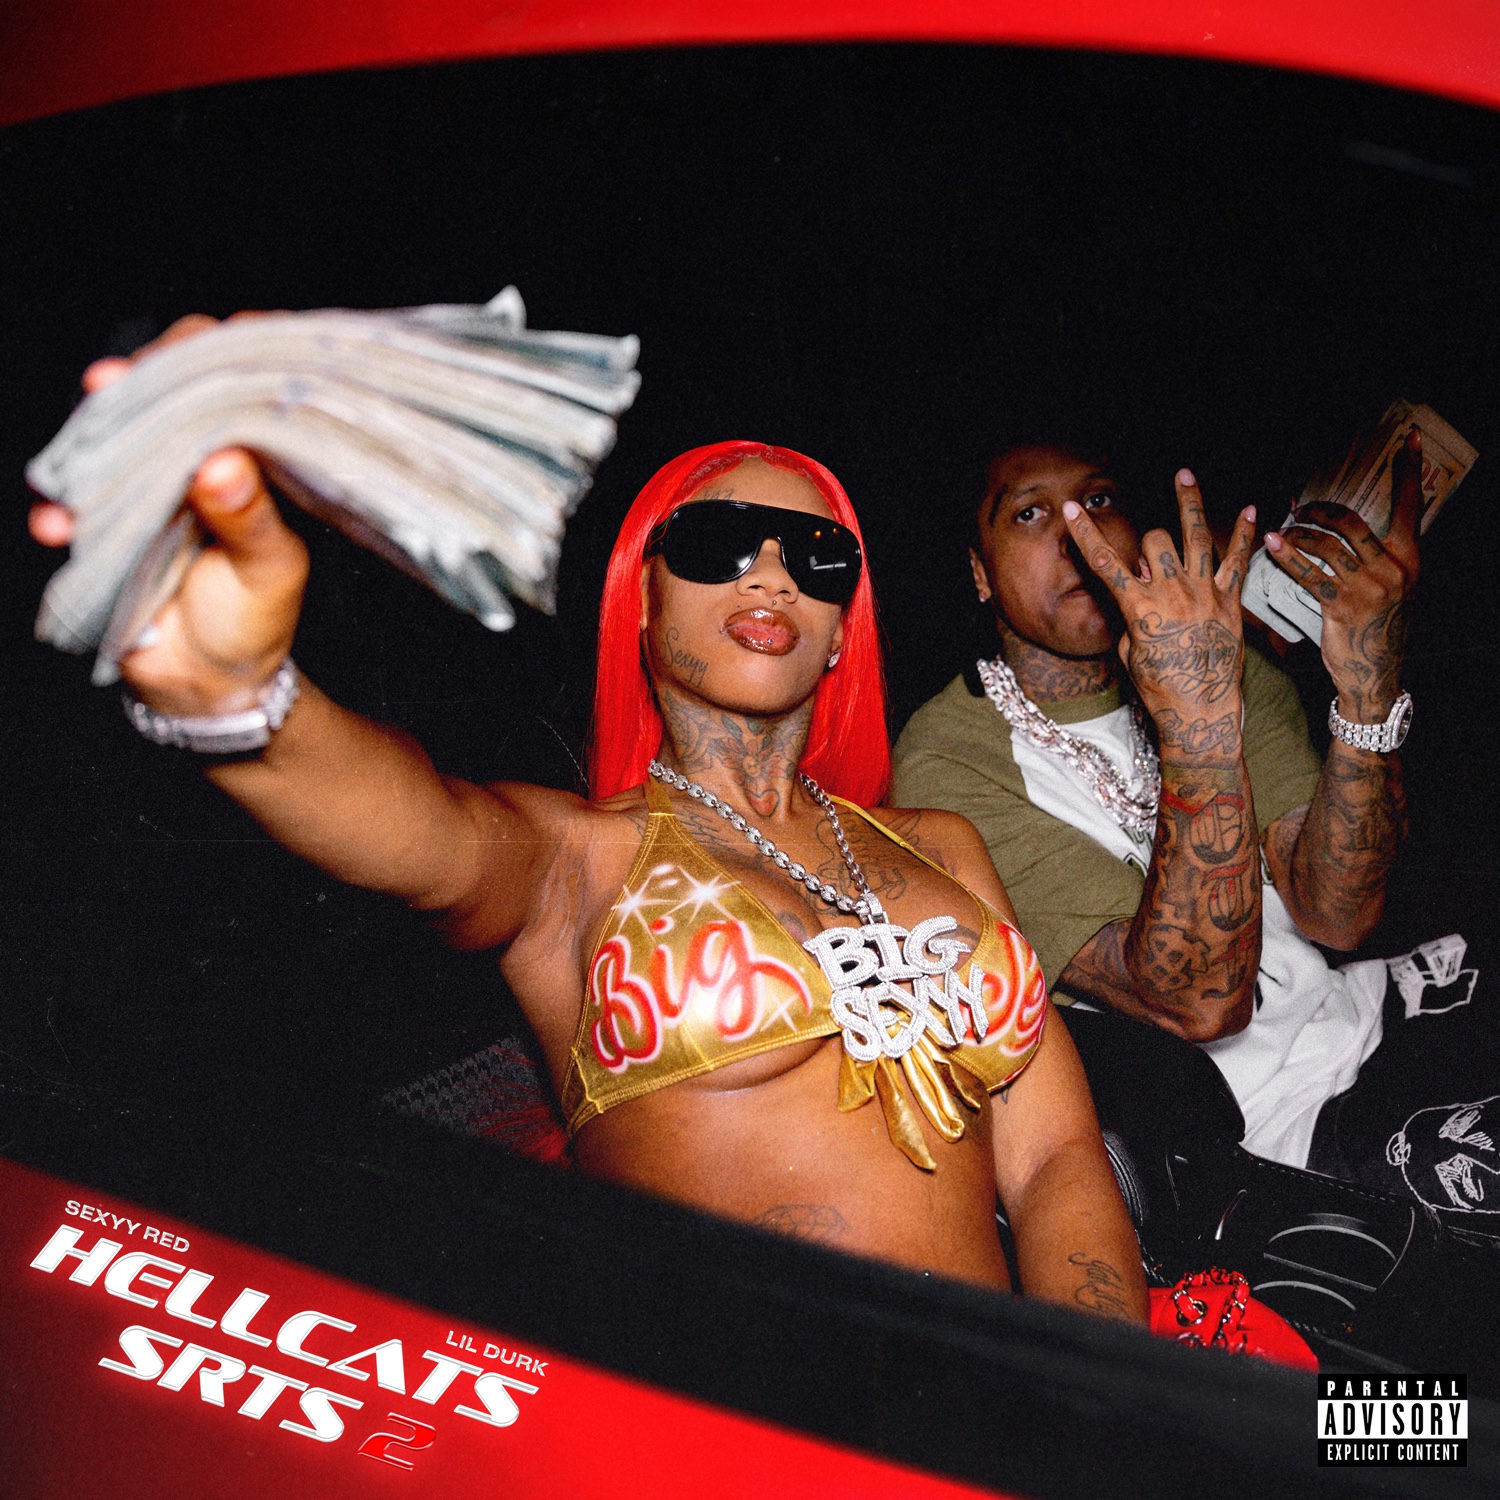 Art for Hellcats SRTs 2 (Clean) by Sexyy Red ft Lil Durk